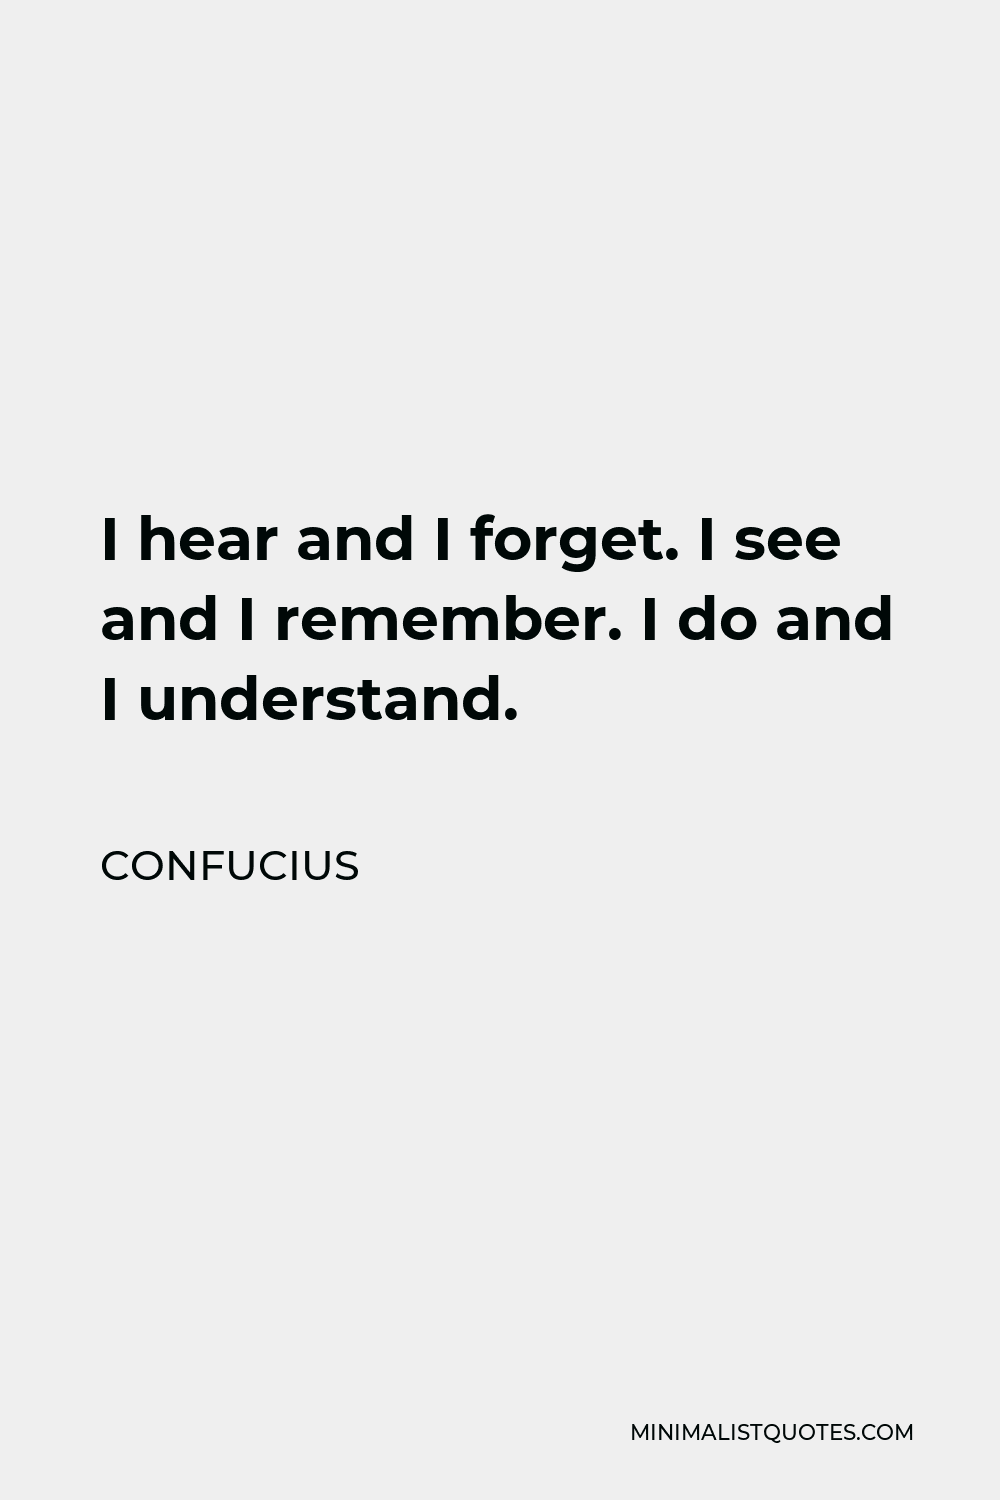 Confucius Quote - I hear and I forget. I see and I remember. I do and I understand.